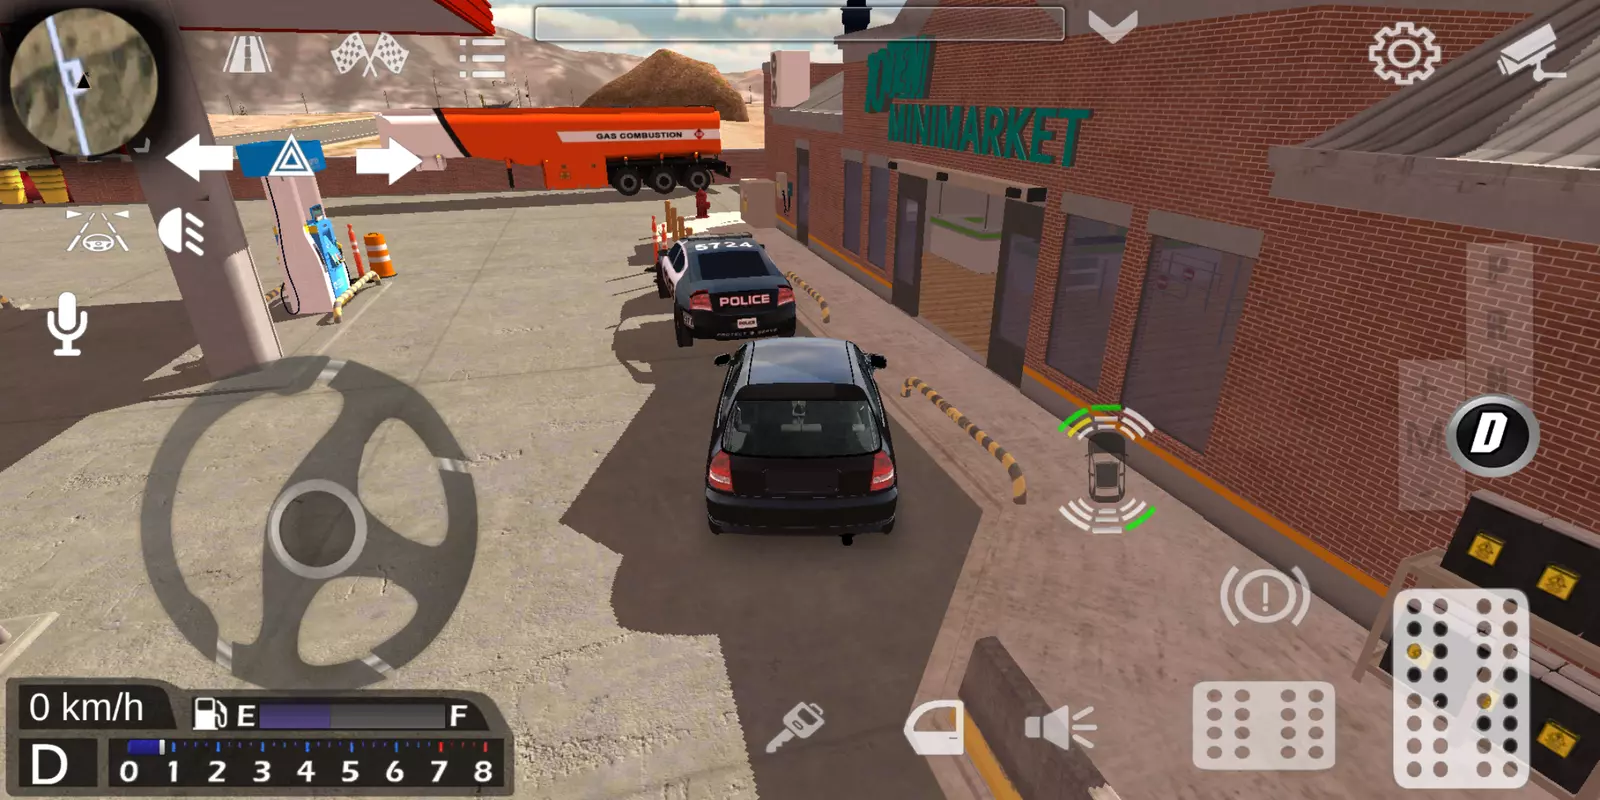 Corrida Livre Multiplayer Free APK 1.02 for Android – Download